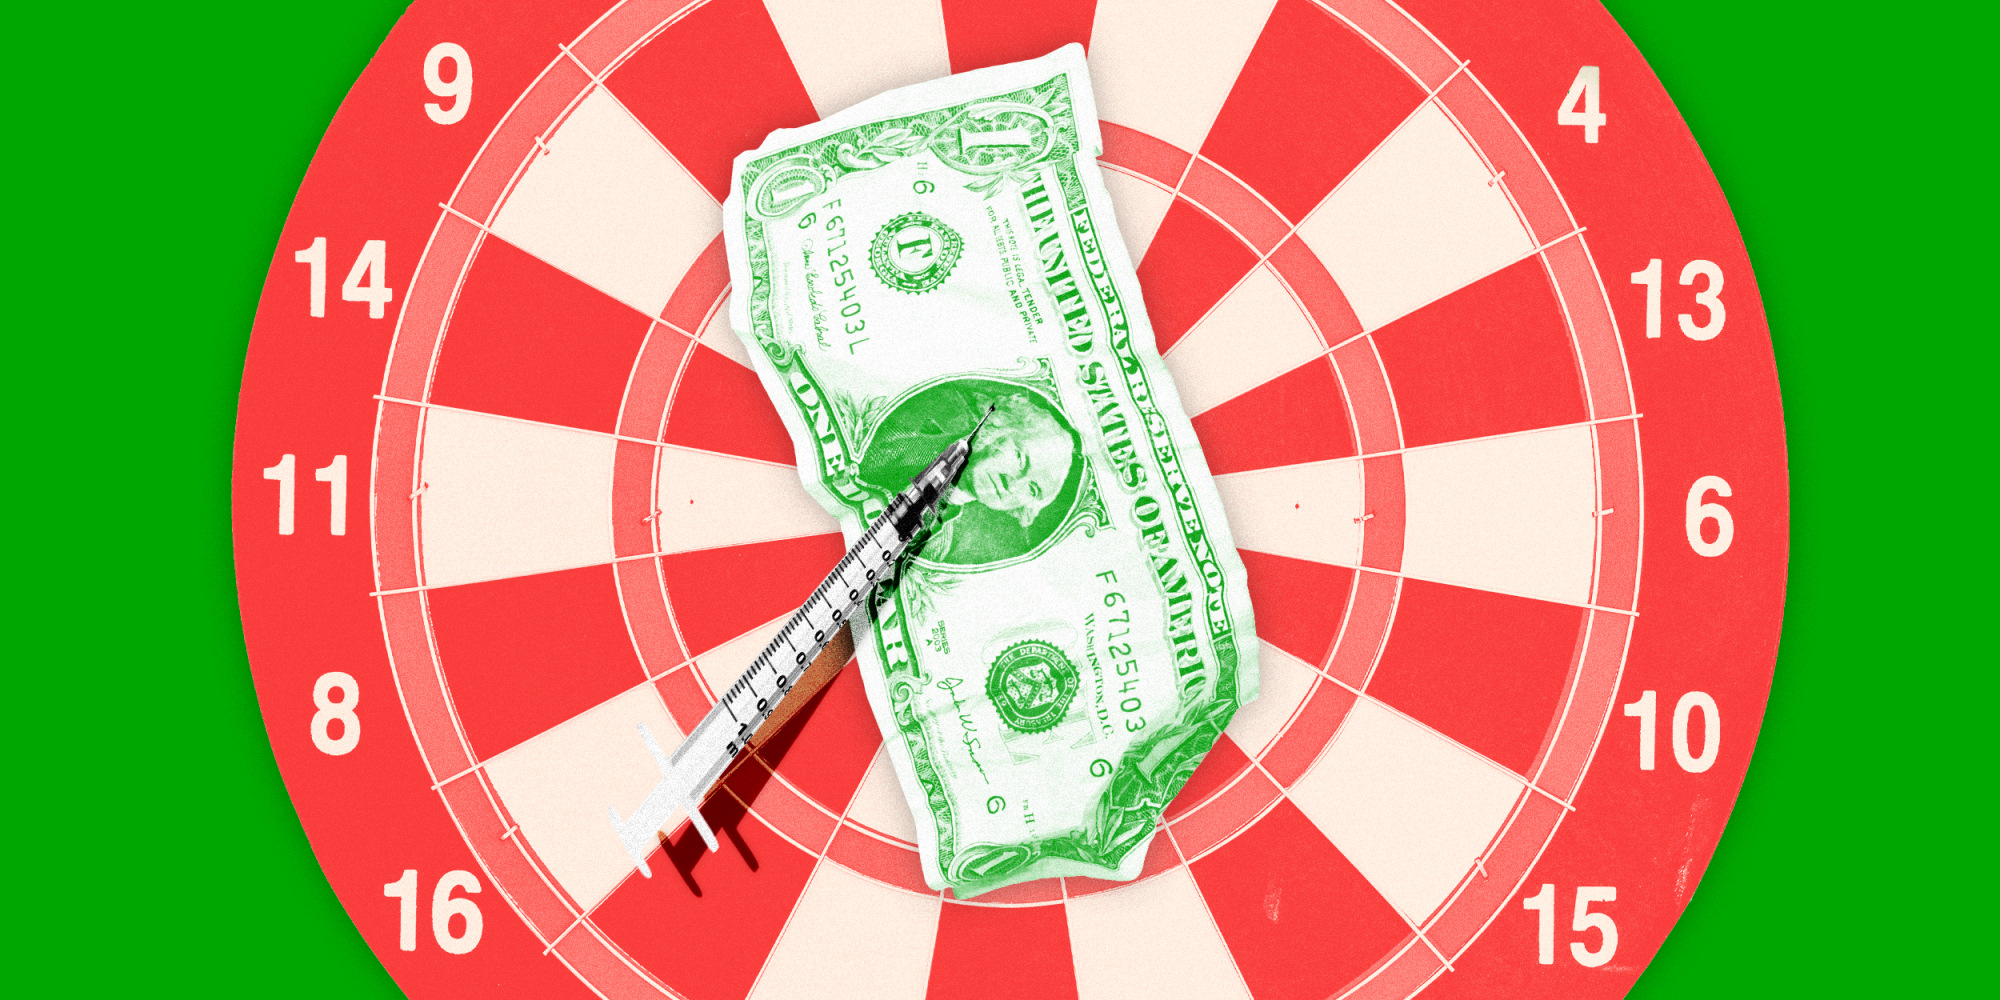 An illustration of a target and a vaccine shaped like a dart hitting the bullseye